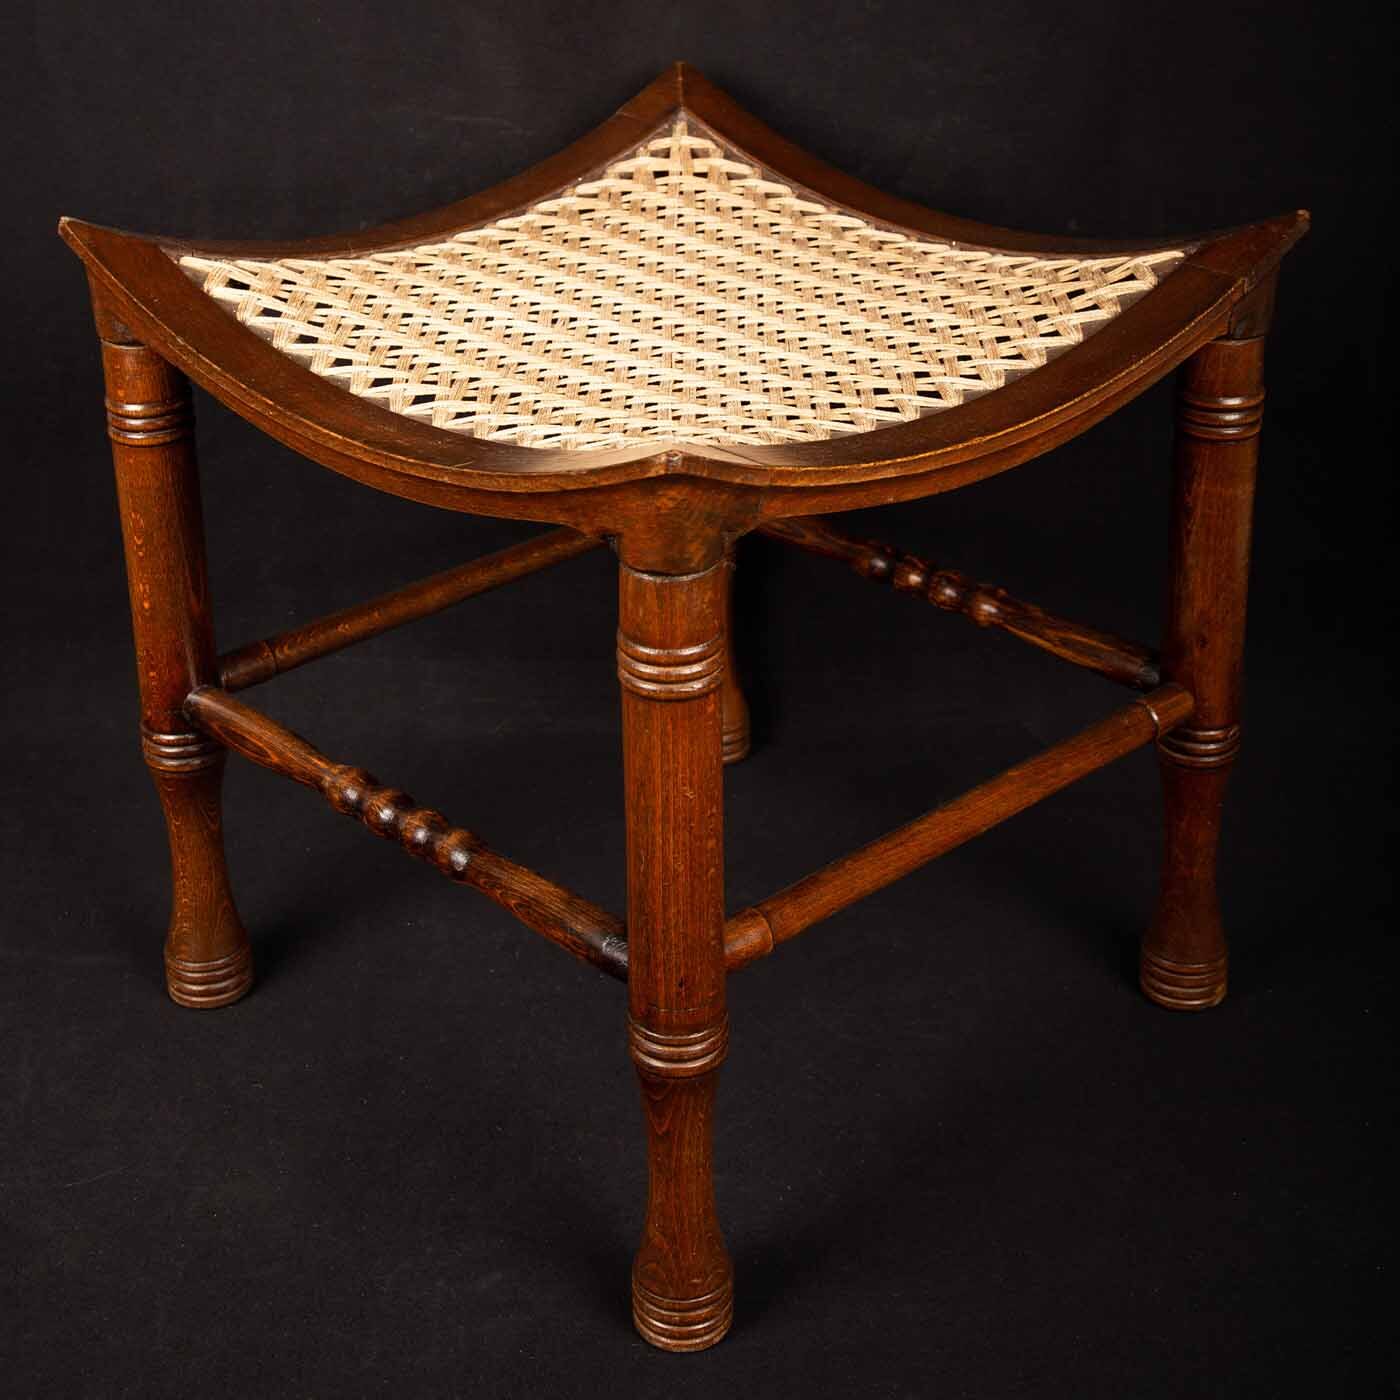 Wood and Cord Thebes Stool, 19th C